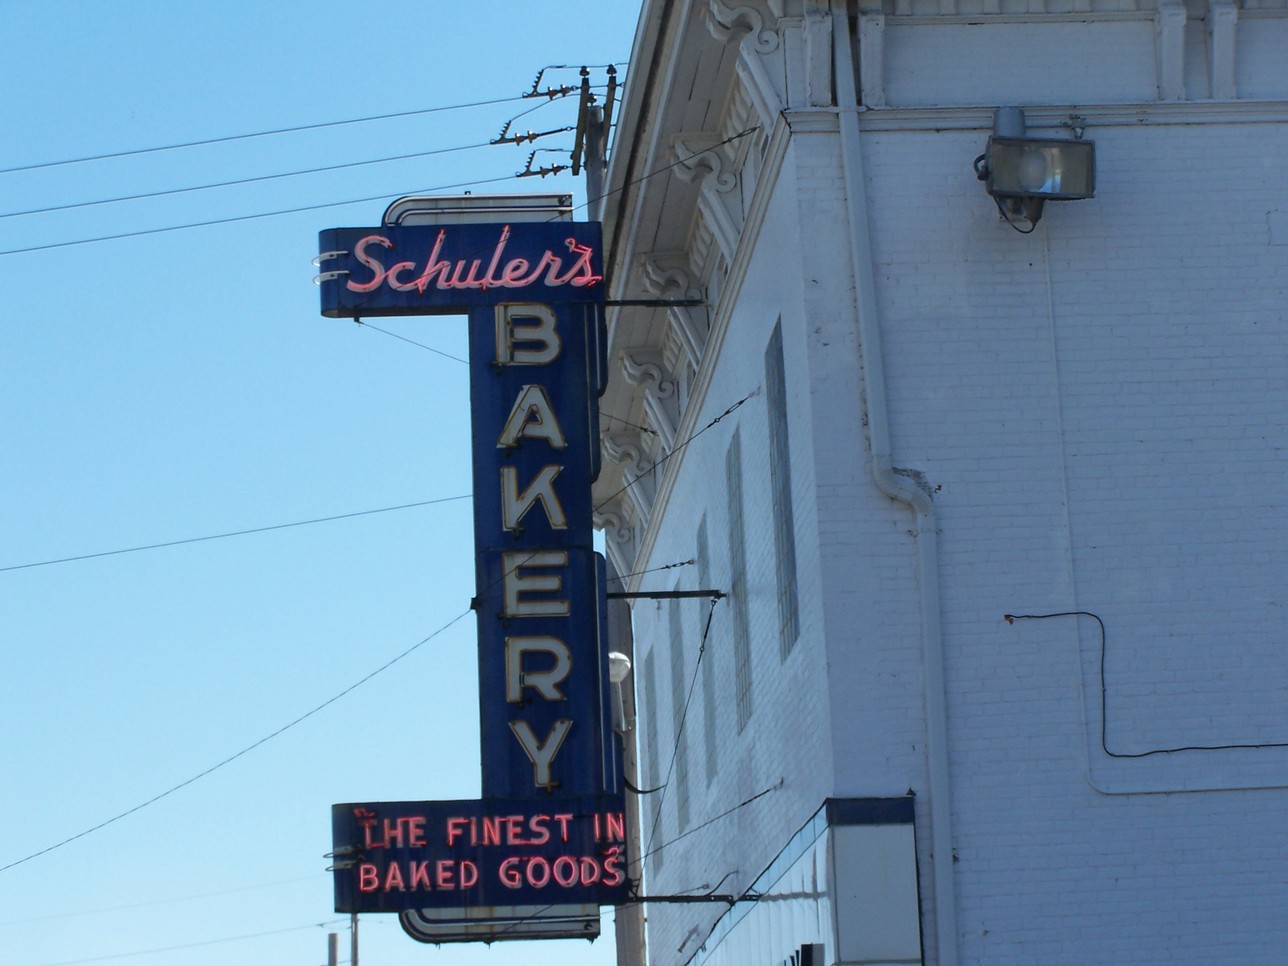 Springfield, OH: Schuler's Bakery on the Old National Road